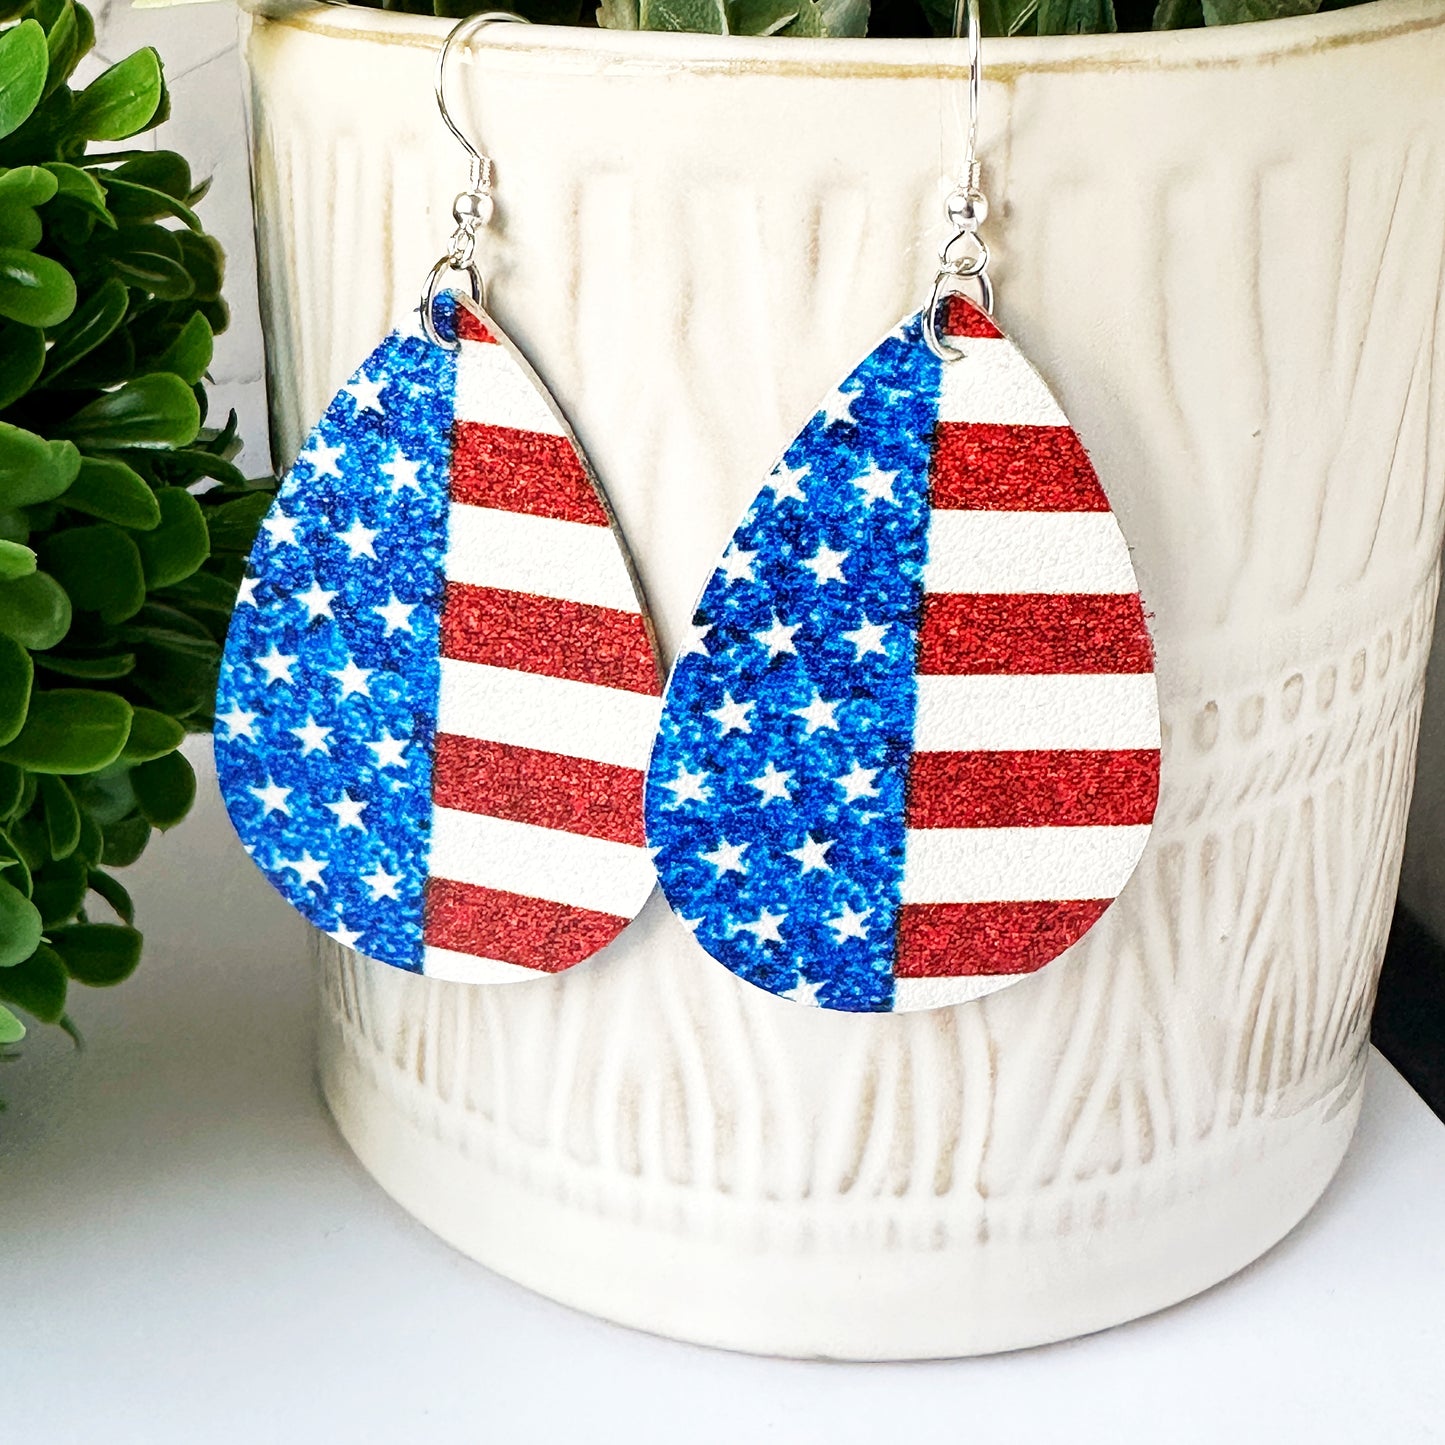 Mary Lou - Stars and Stripes Patriotic 4th of July earrings